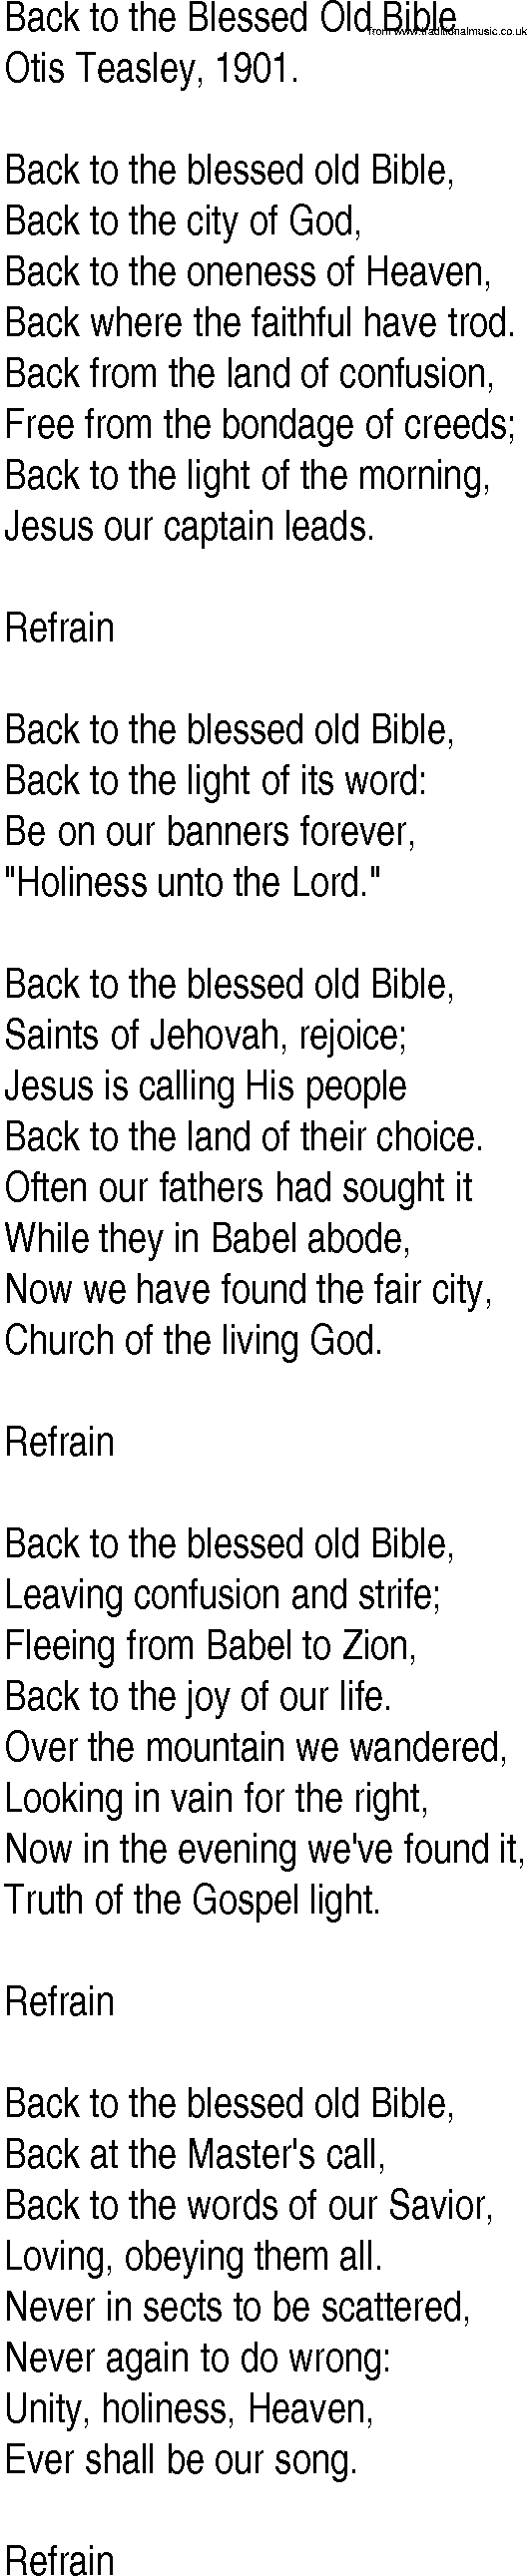 Hymn and Gospel Song: Back to the Blessed Old Bible by Otis Teasley lyrics